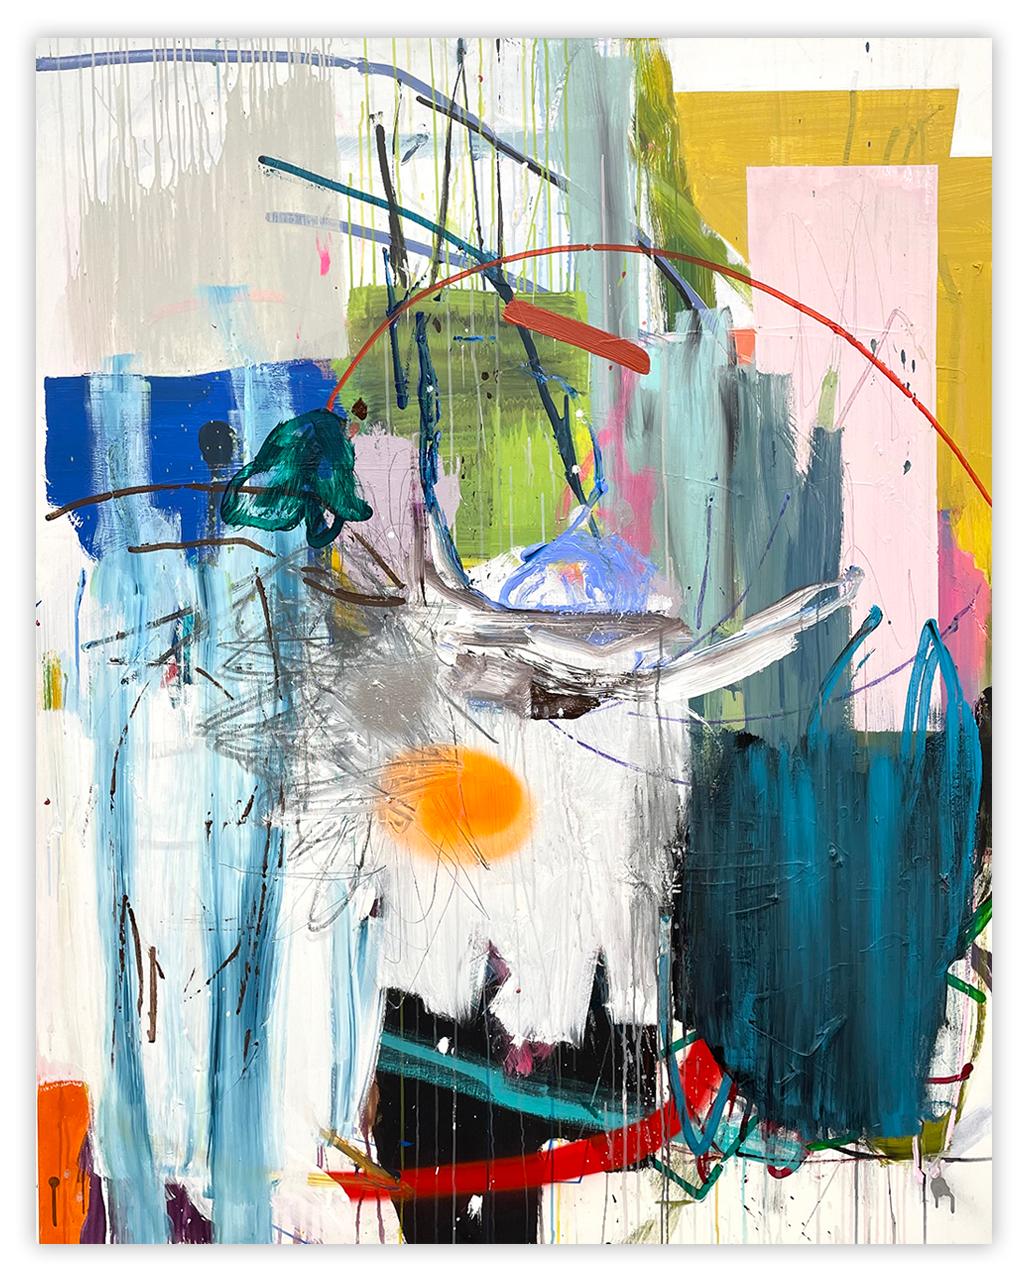 First Class Travel (Abstract Painting)
Mixed Media on Canvas — Unframed.

Ludovic Dervillez is a French abstract painter. His work explores the amalgamation of spontaneity, materiality, and emotion through a visual display of color and dynamic